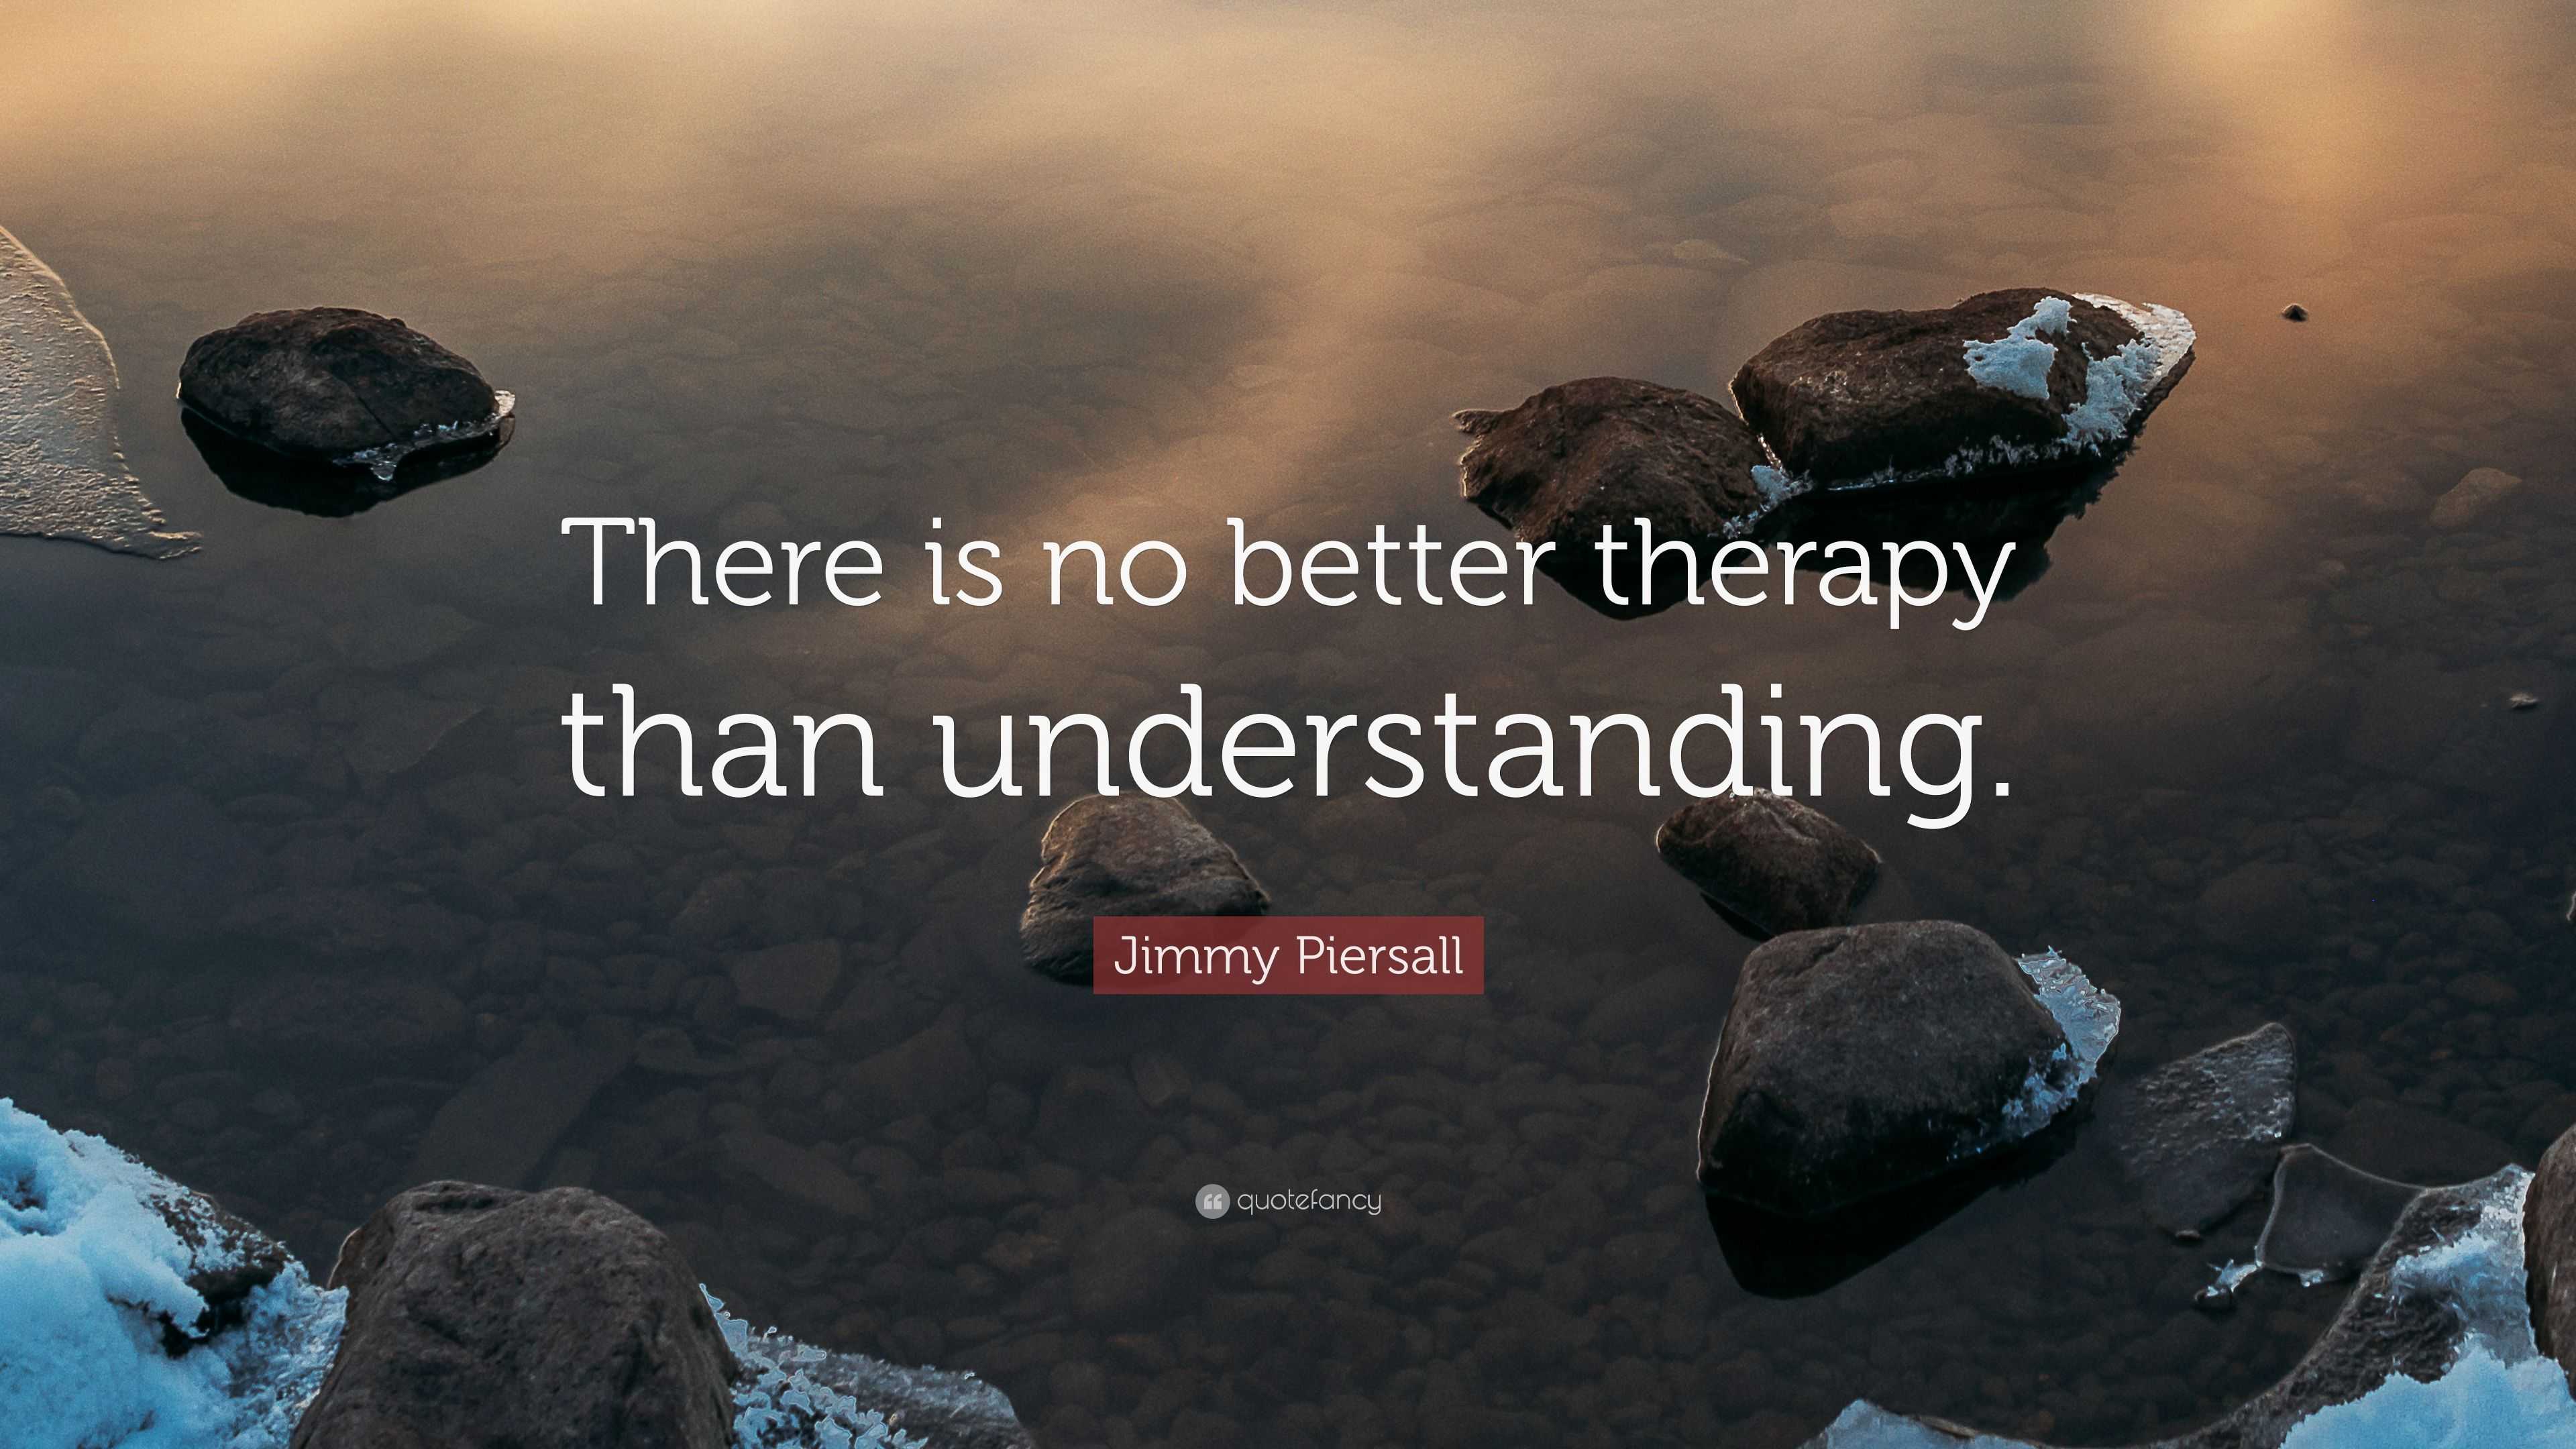 Jimmy Piersall Quote: “There is no better therapy than understanding.”